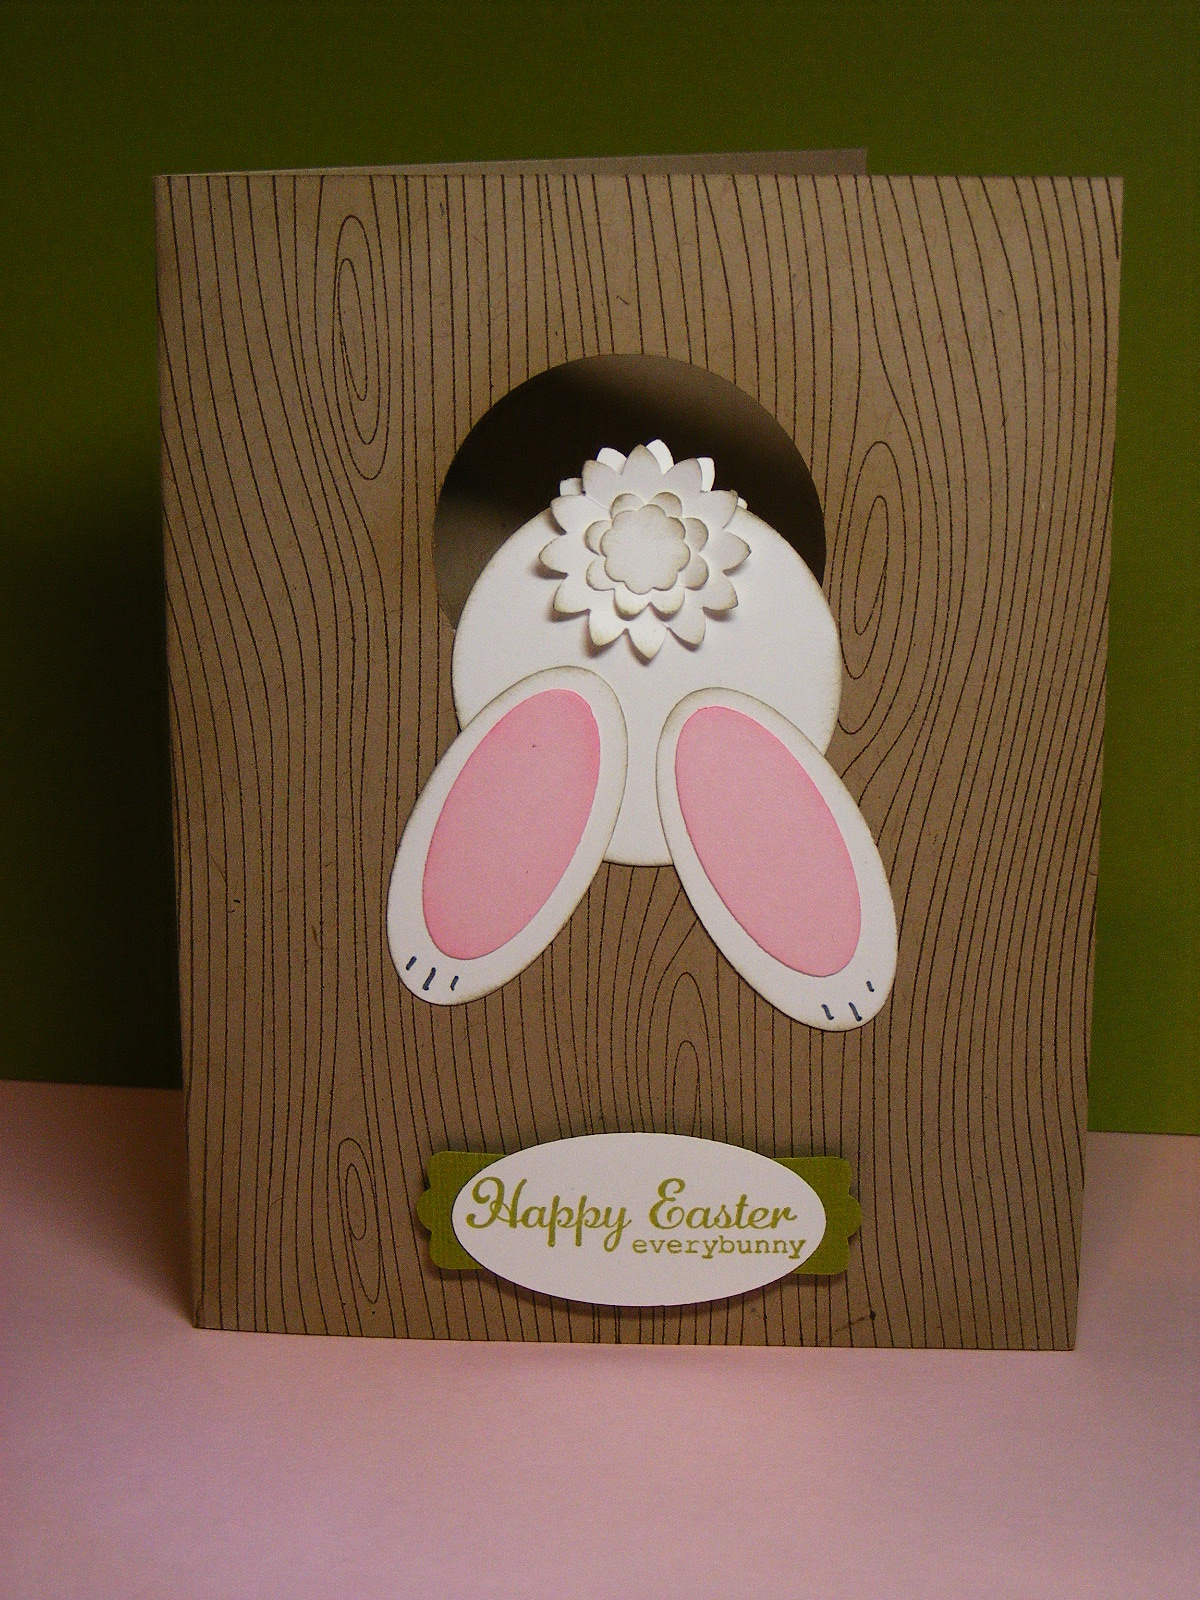 A La Cards: Some Easter cuteness...